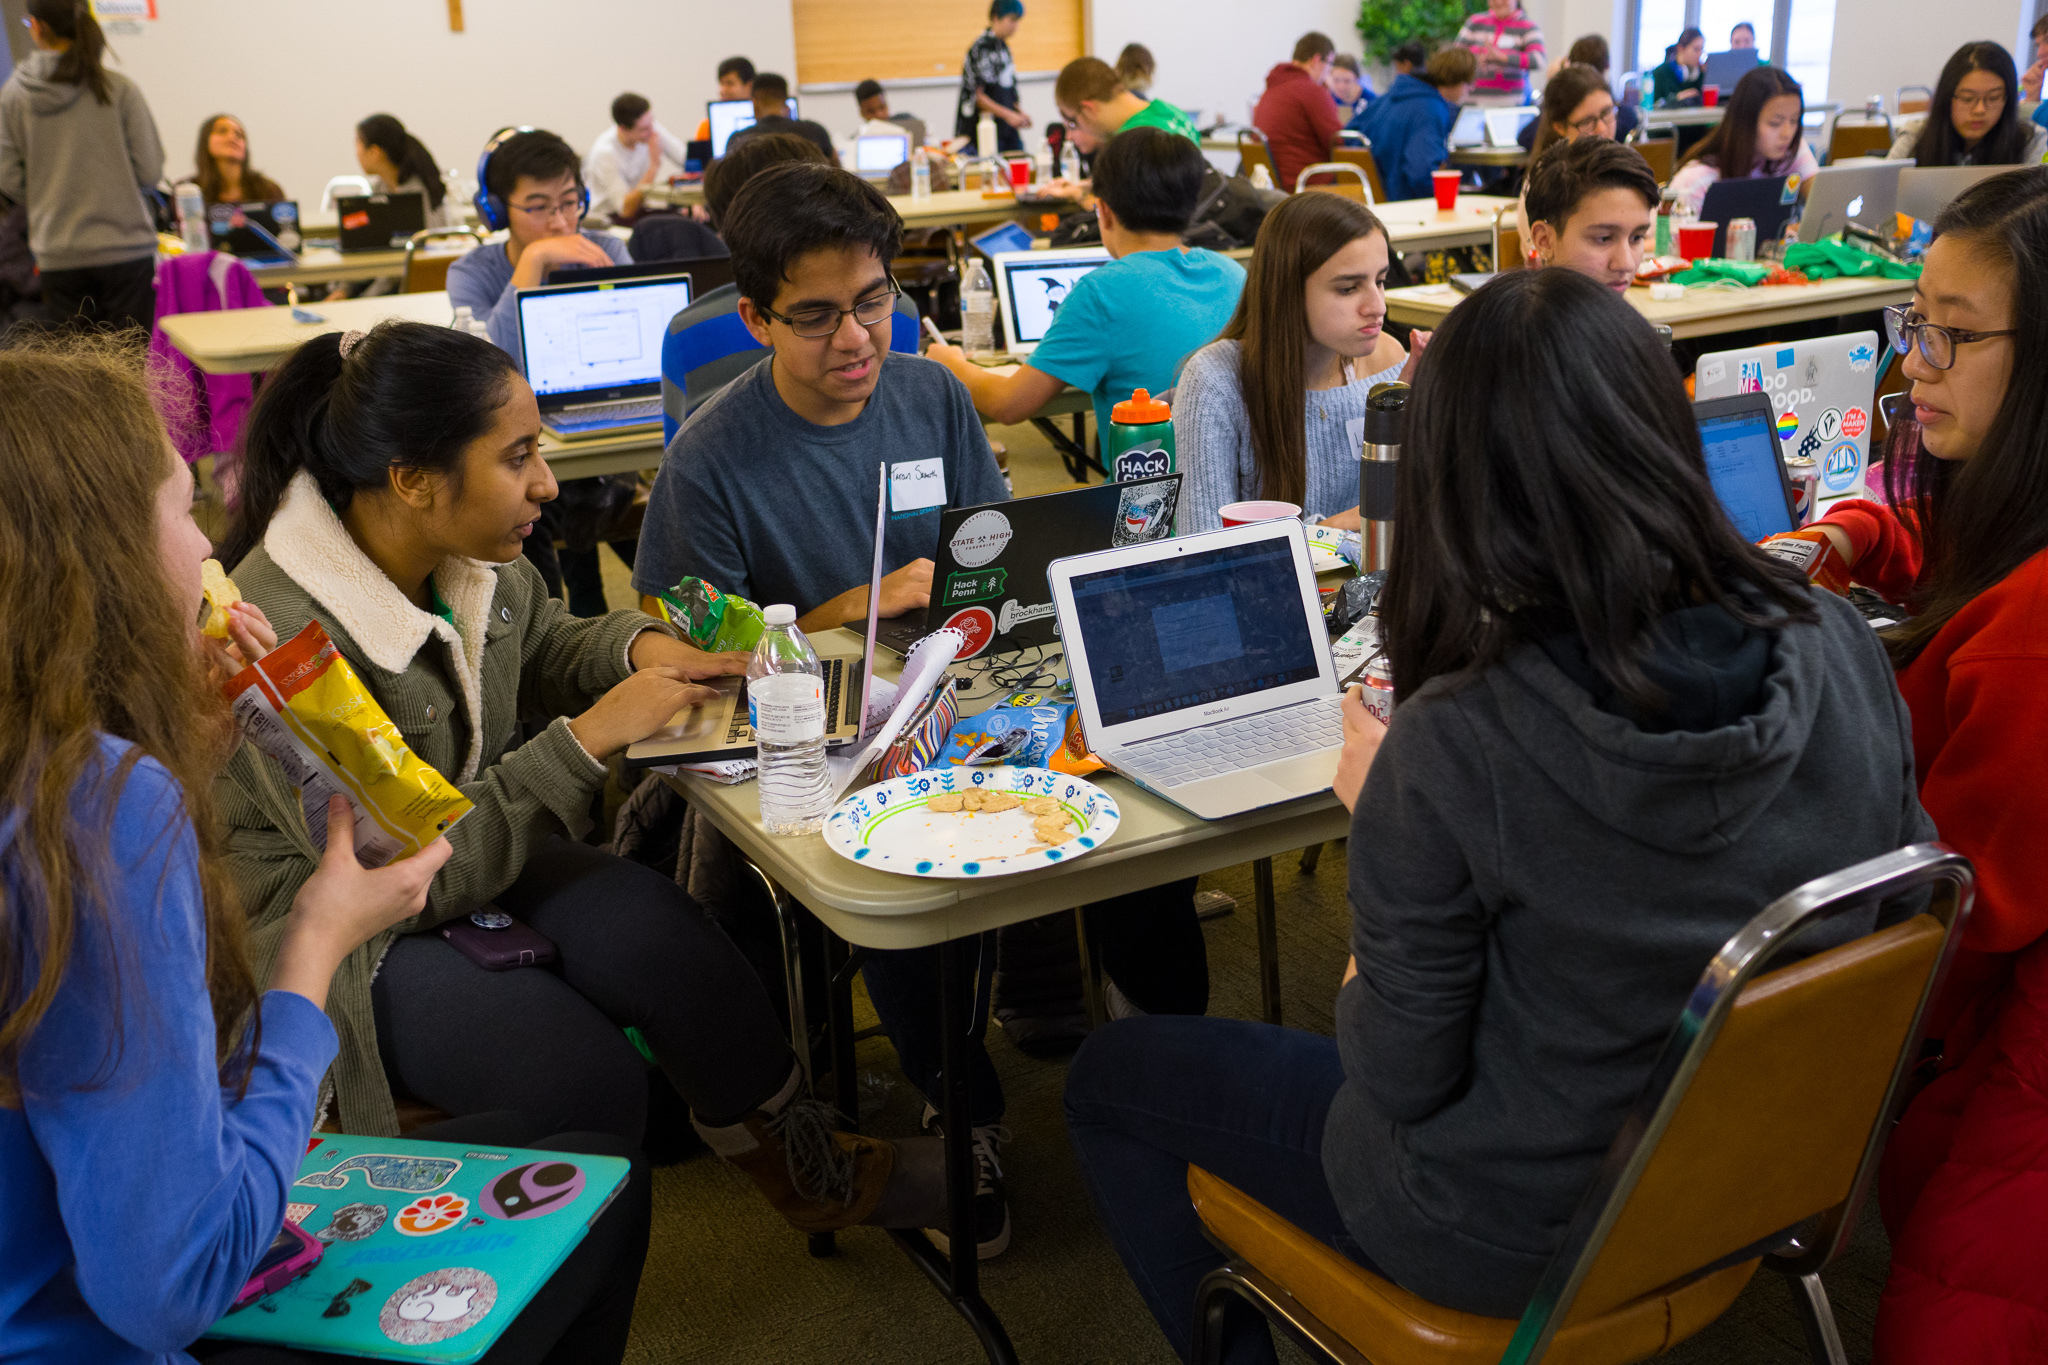 Students coding at a Hack Club event